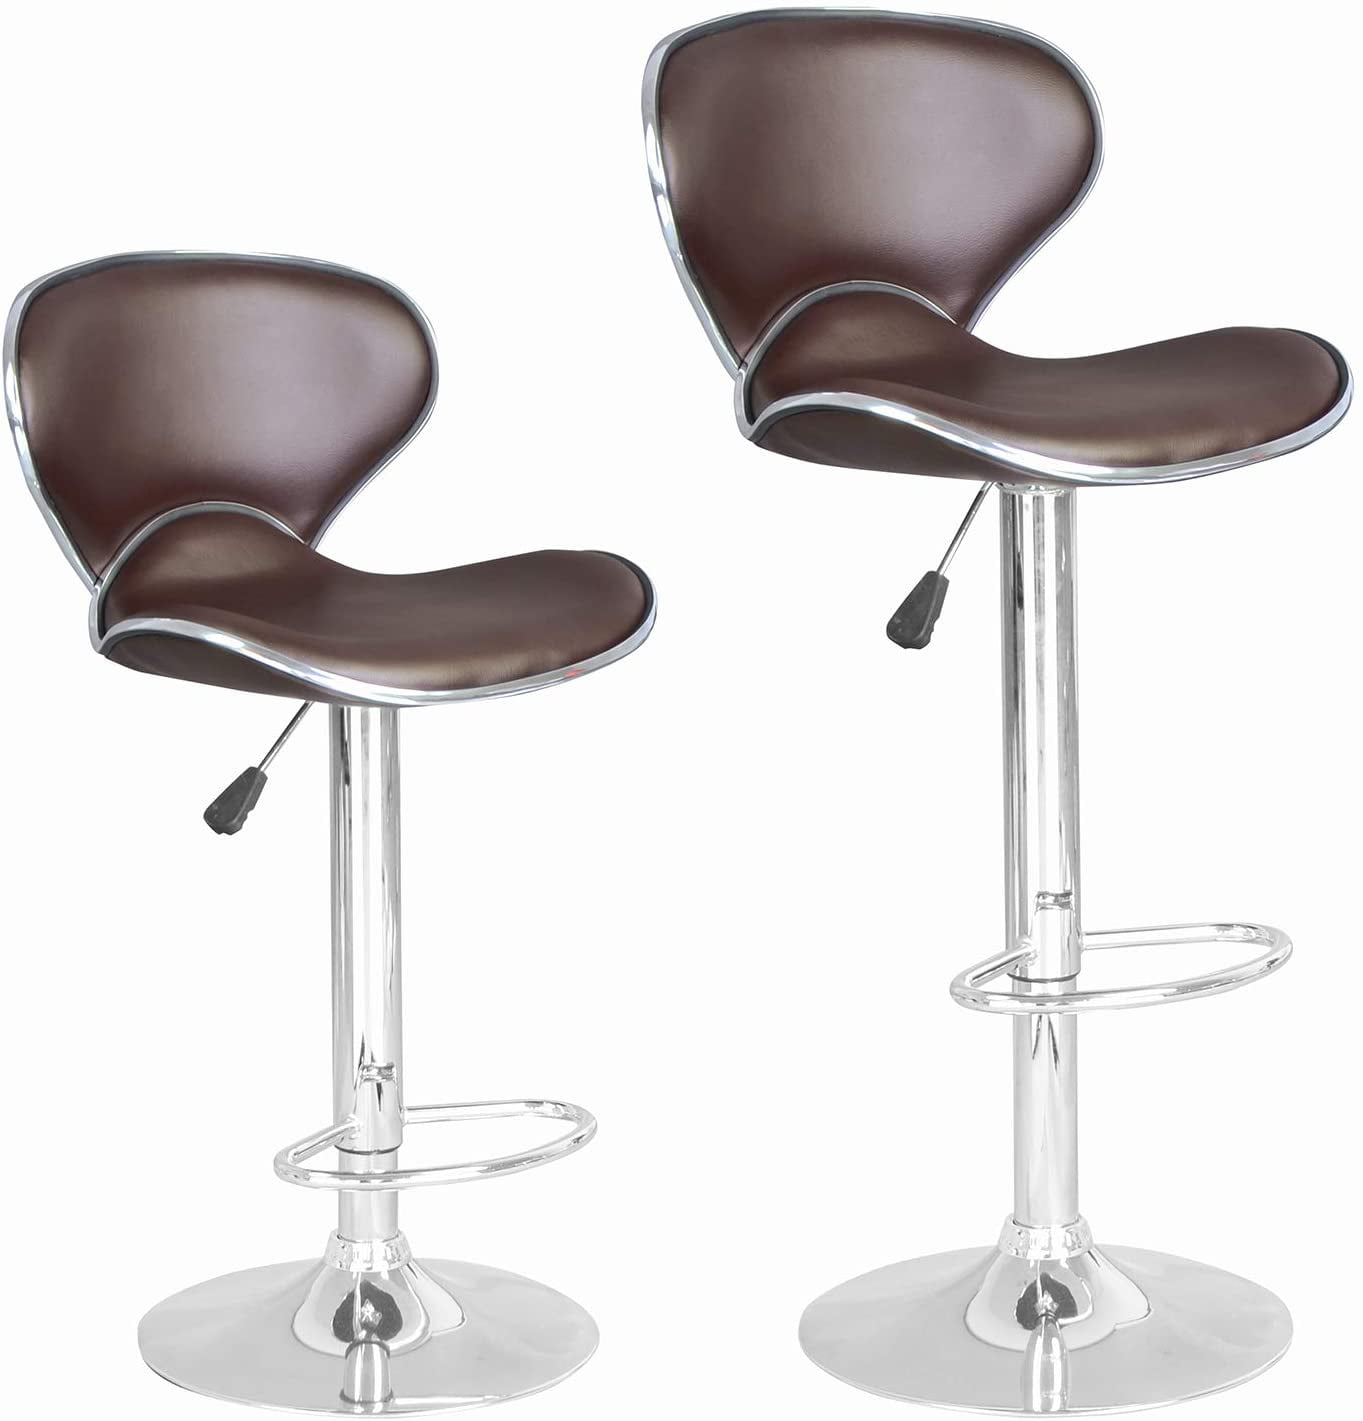 Set Of 2 Leather Adjustable Salons Bar Stools Counter Height Swivel US Stock 